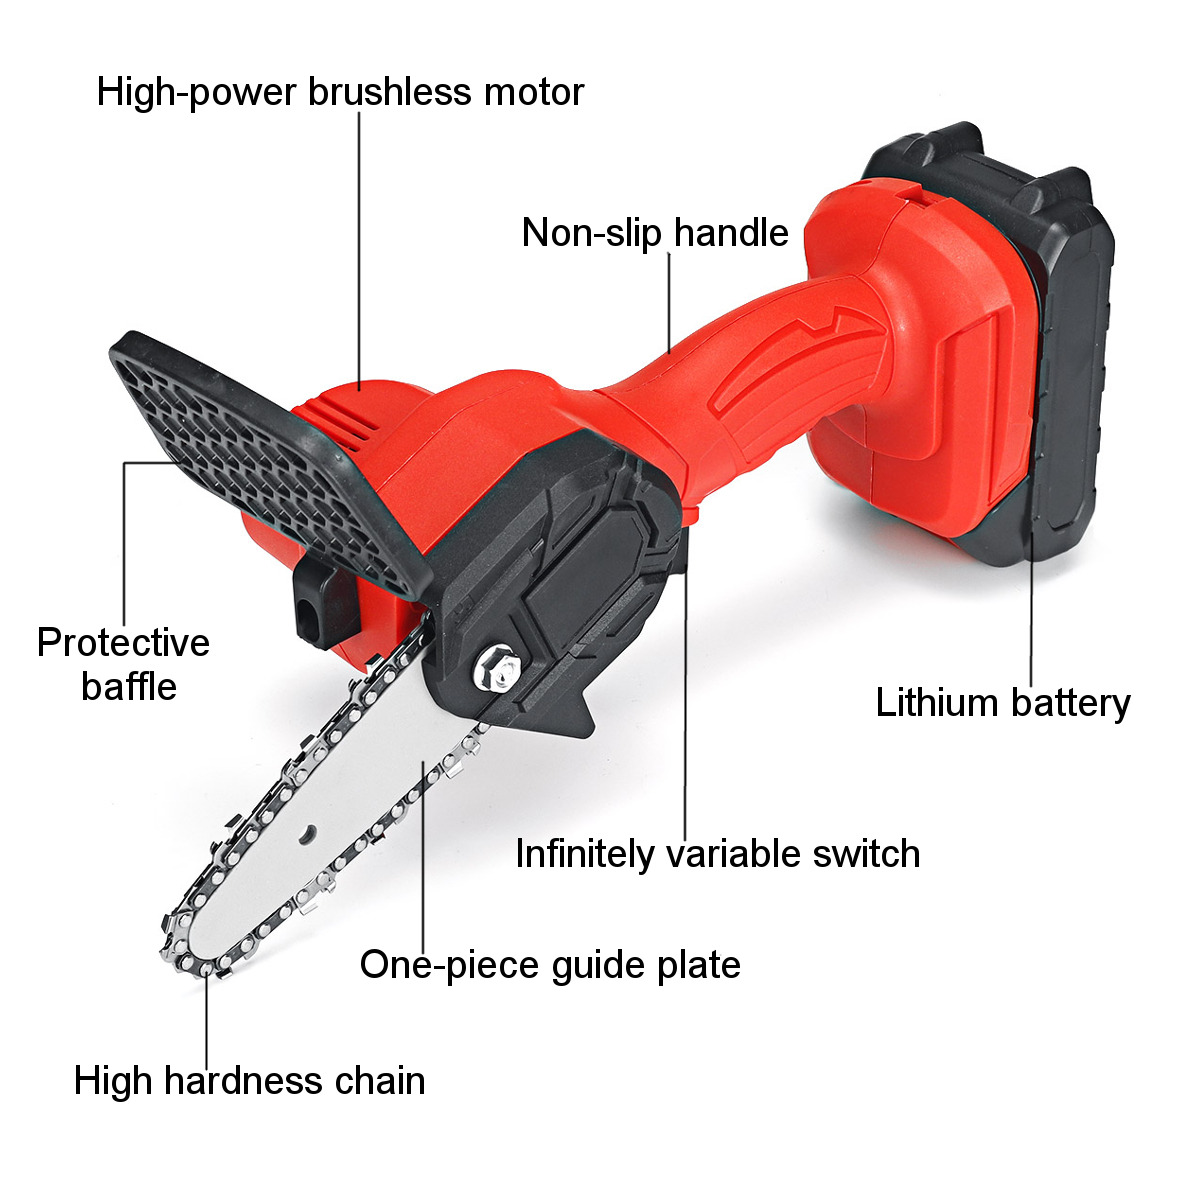 4-Inch-Portable-Cordless-Electric-Chain-Saw-Wood-3000rmin-Tree-ChainSaws-Wood-Cutting-Tool-W-1-or-2--1770254-9